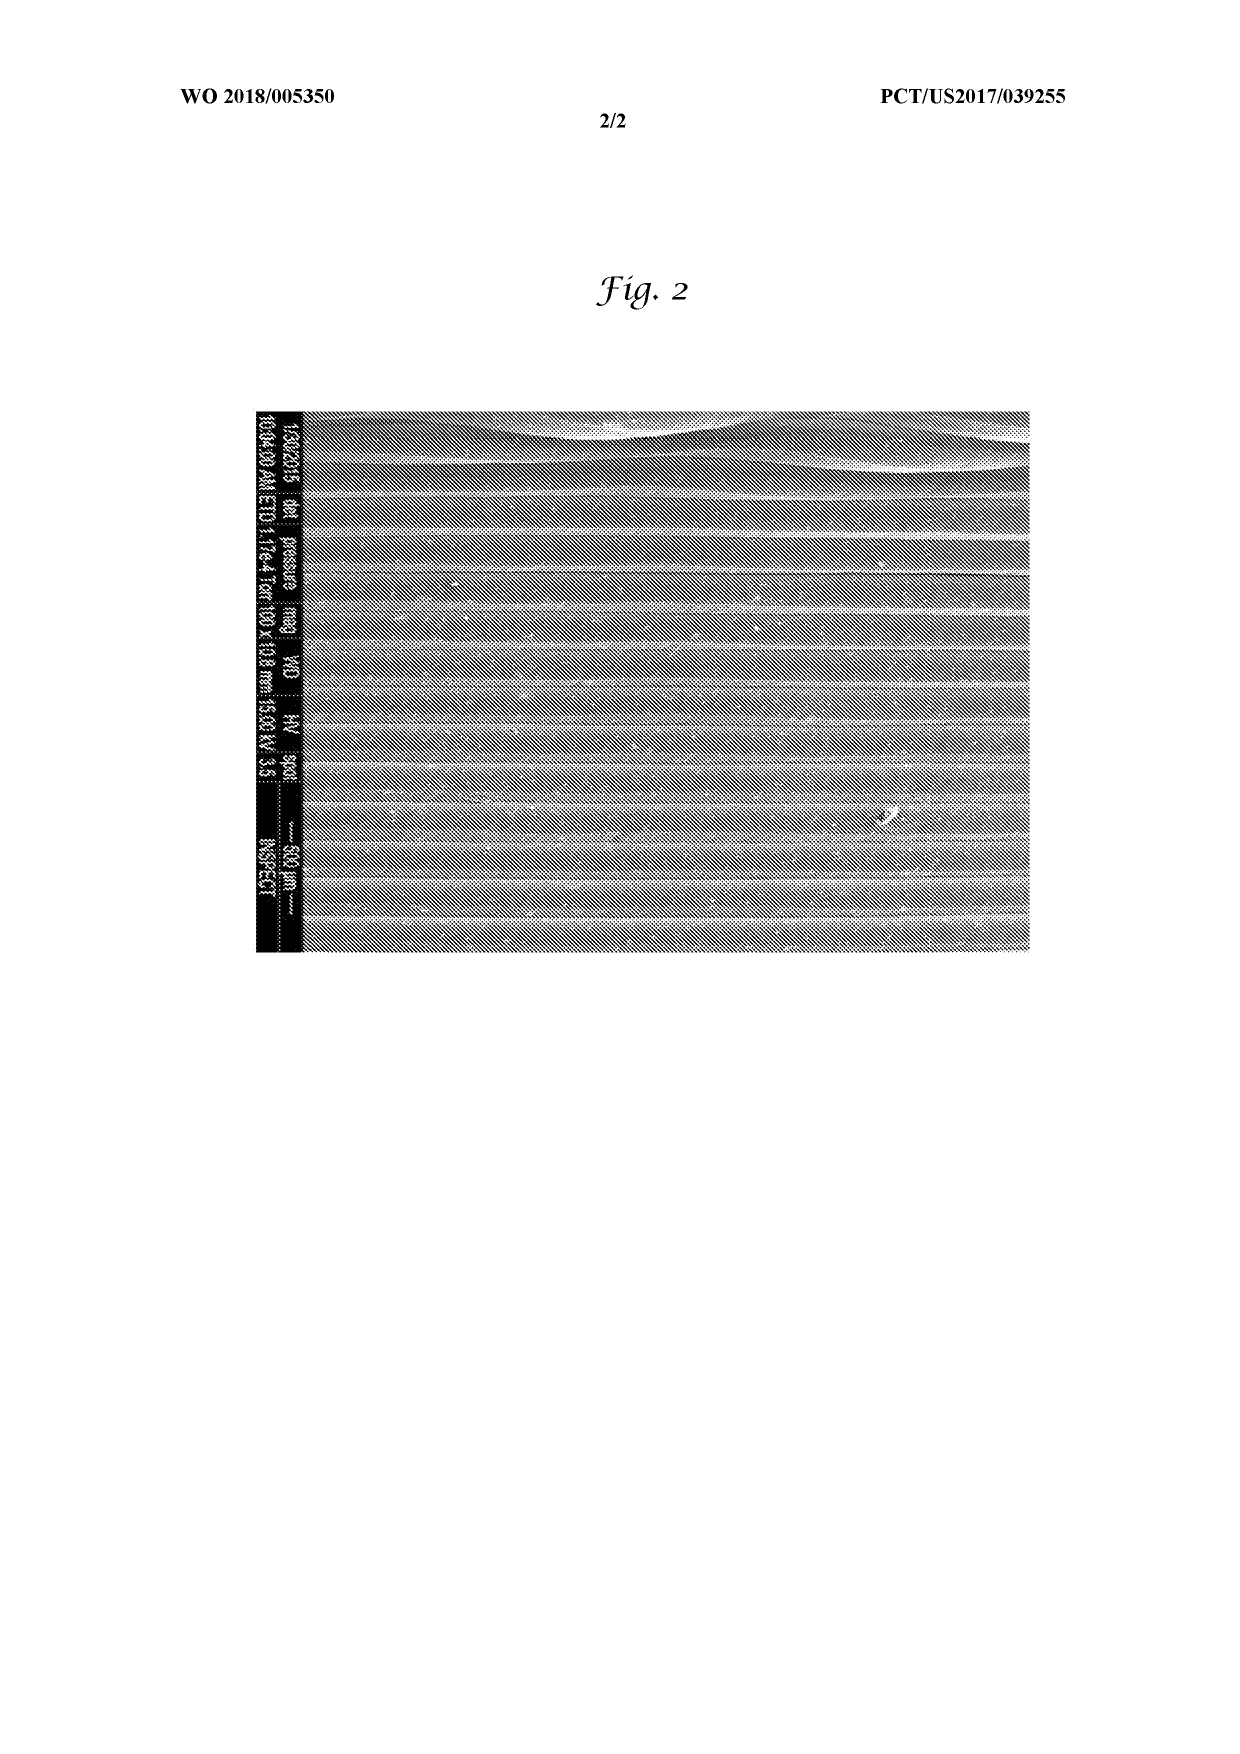 Method for additive manufacturing porous inorganic structures and composites made therefrom